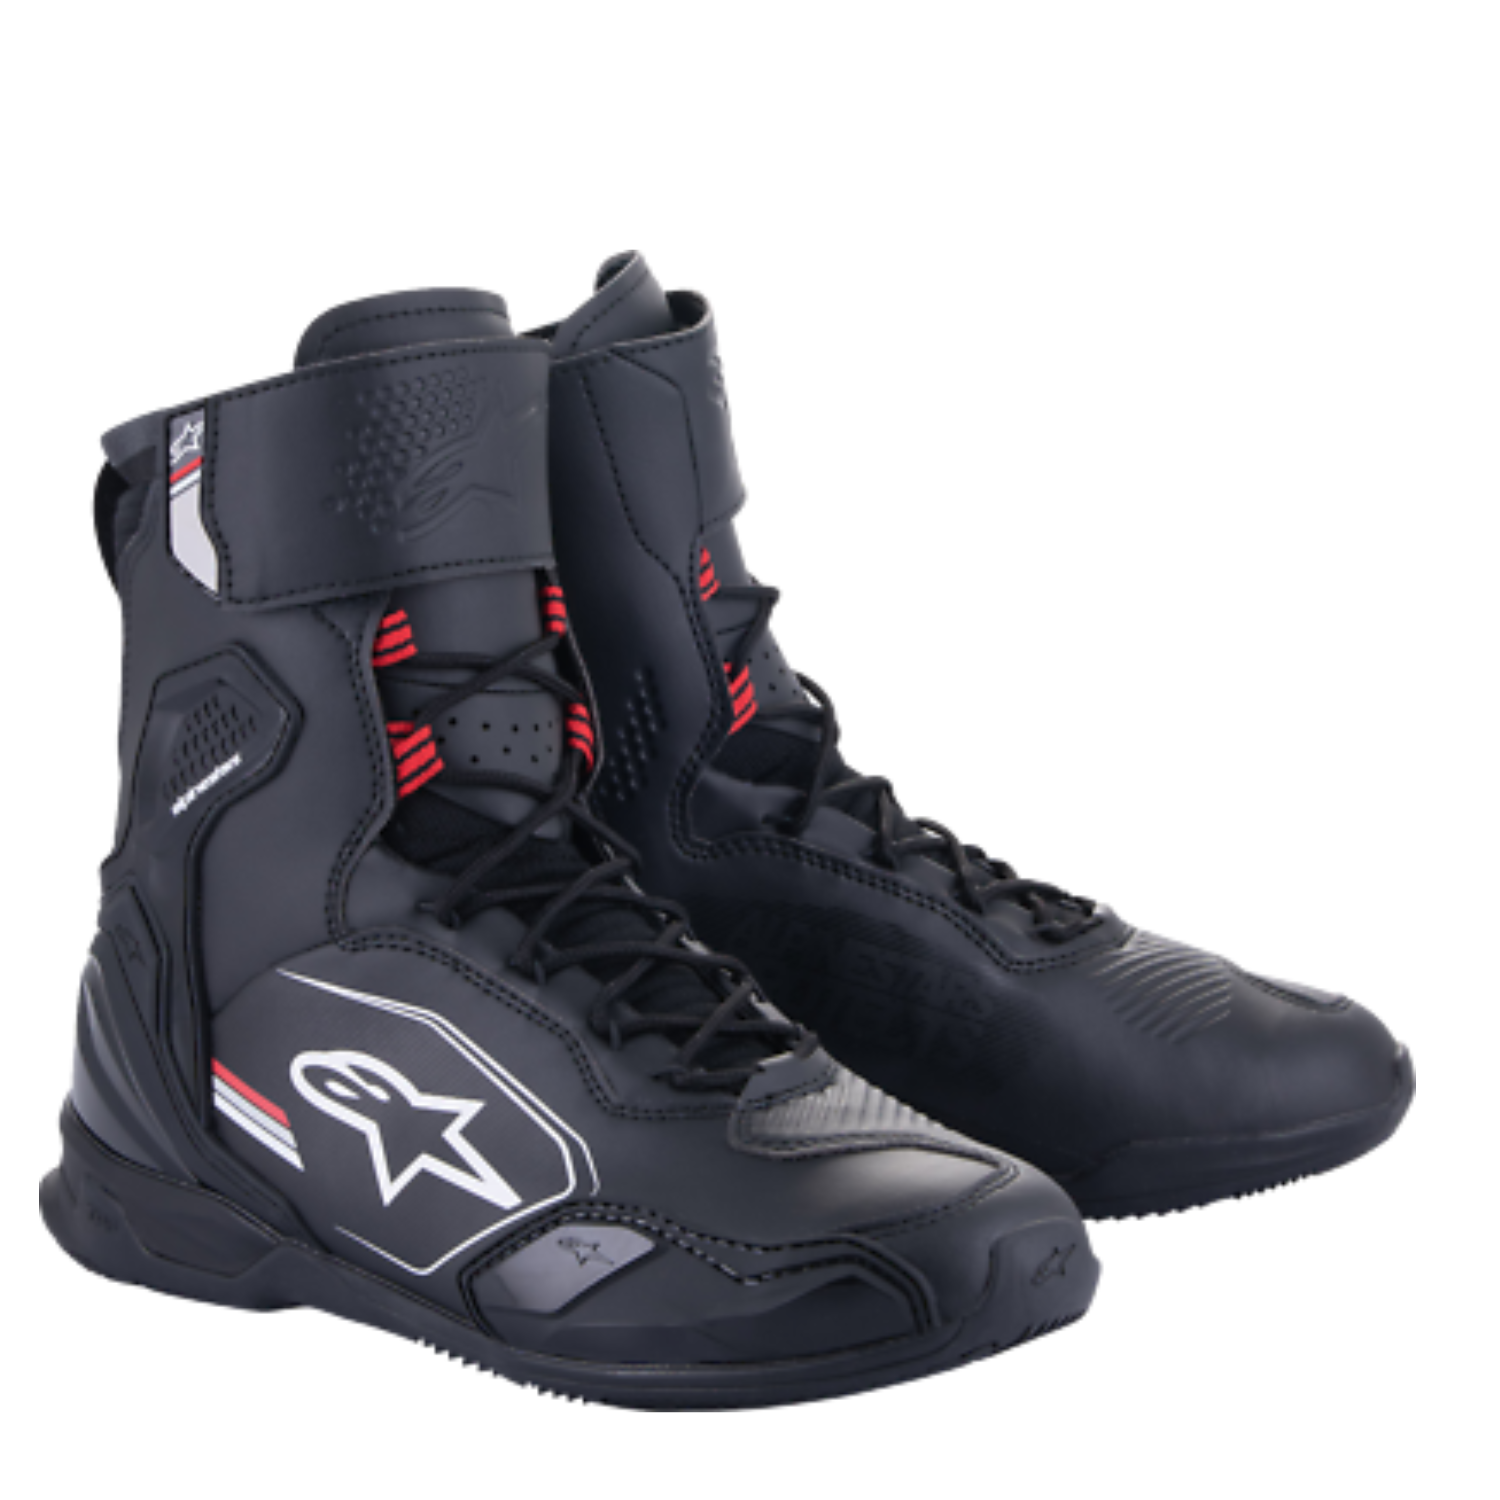 Image of Alpinestars Superfaster Shoes Black Gray Bright Red Size US 13 EN